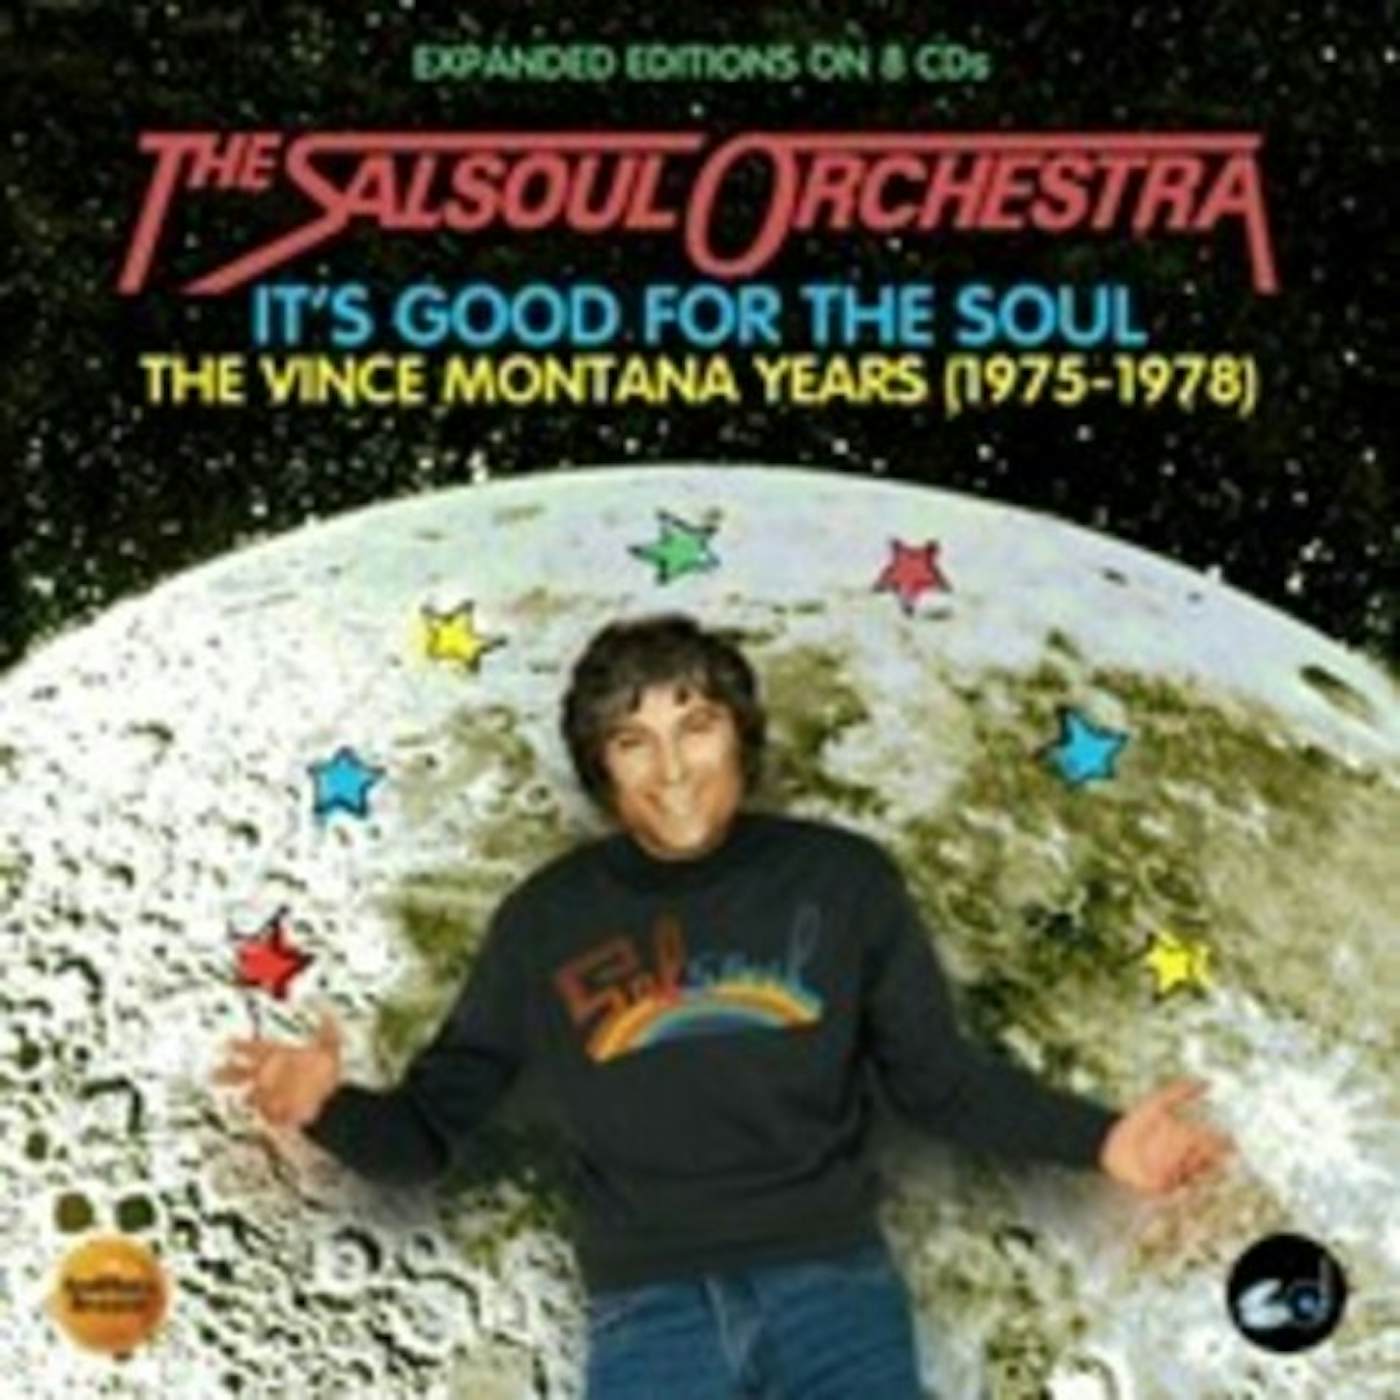 The Salsoul Orchestra IT'S GOOD FOR THE SOUL: VINCE MONTANA YEARS 75-78 CD